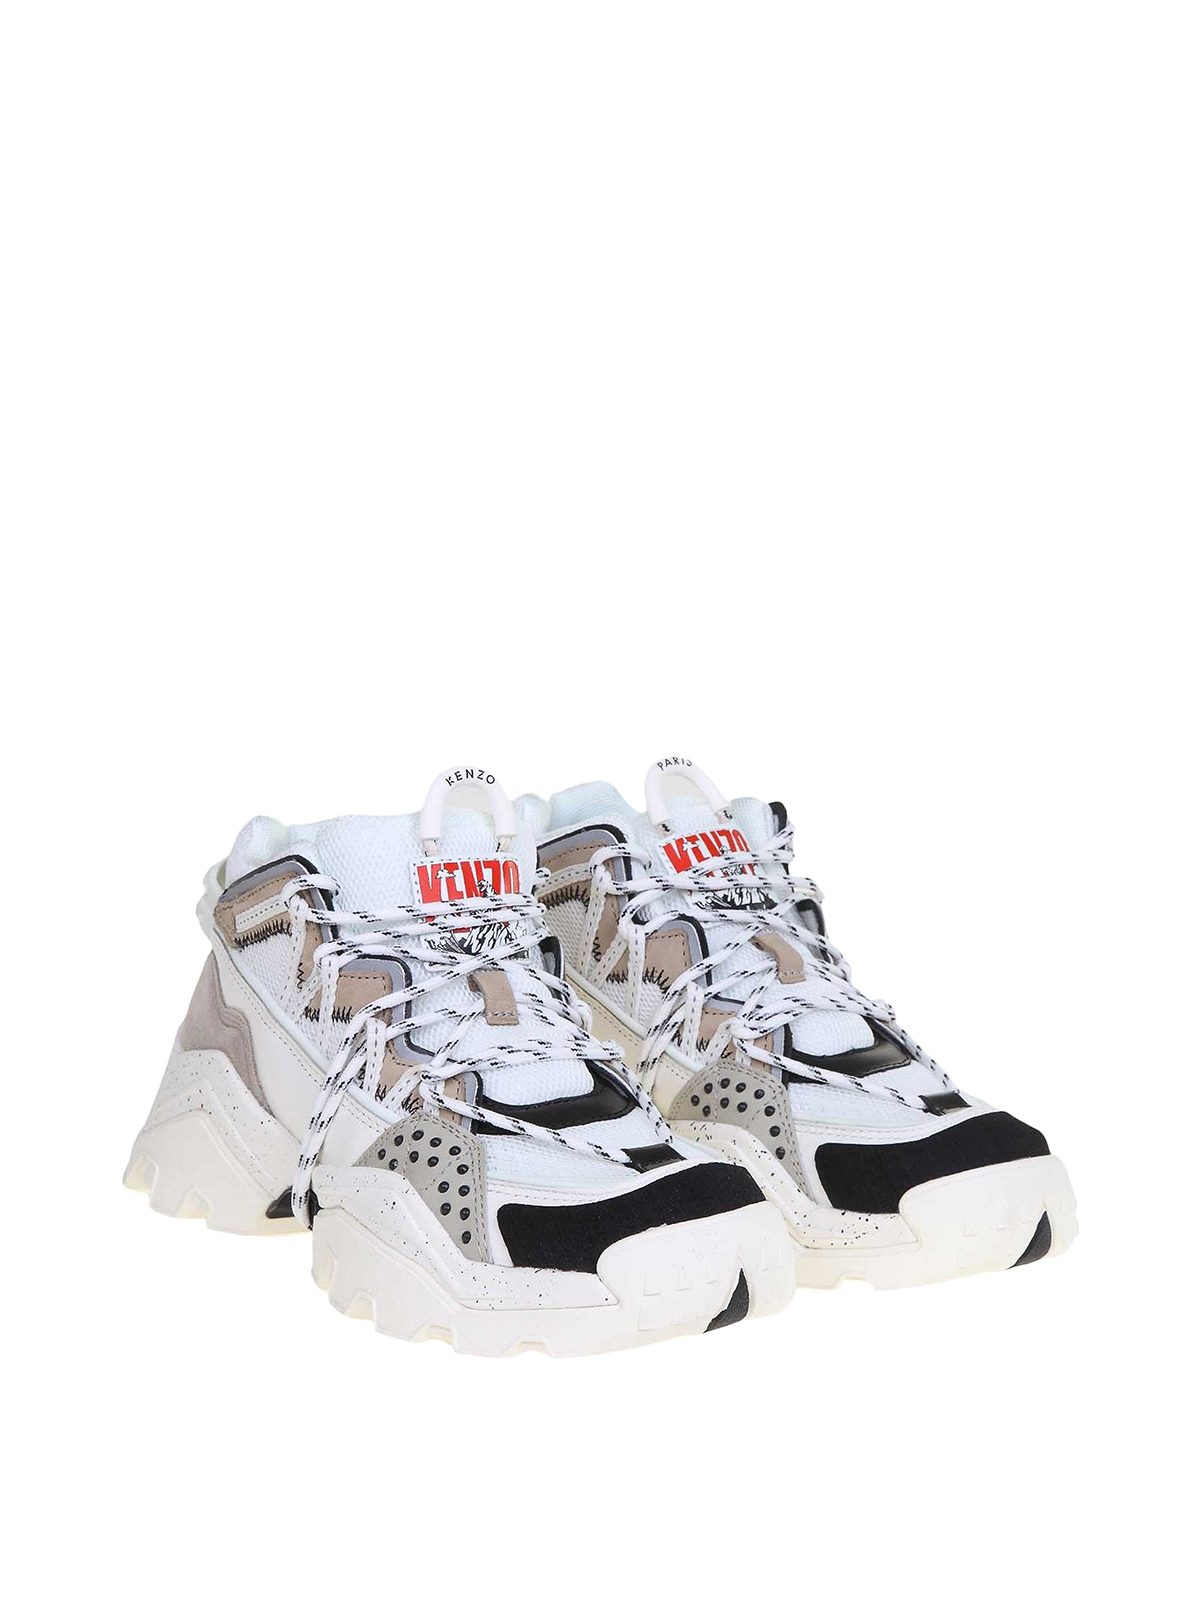 band Ongewijzigd G Trainers Kenzo - Inka sneakers - F962SN300L6993 | Shop online at iKRIX